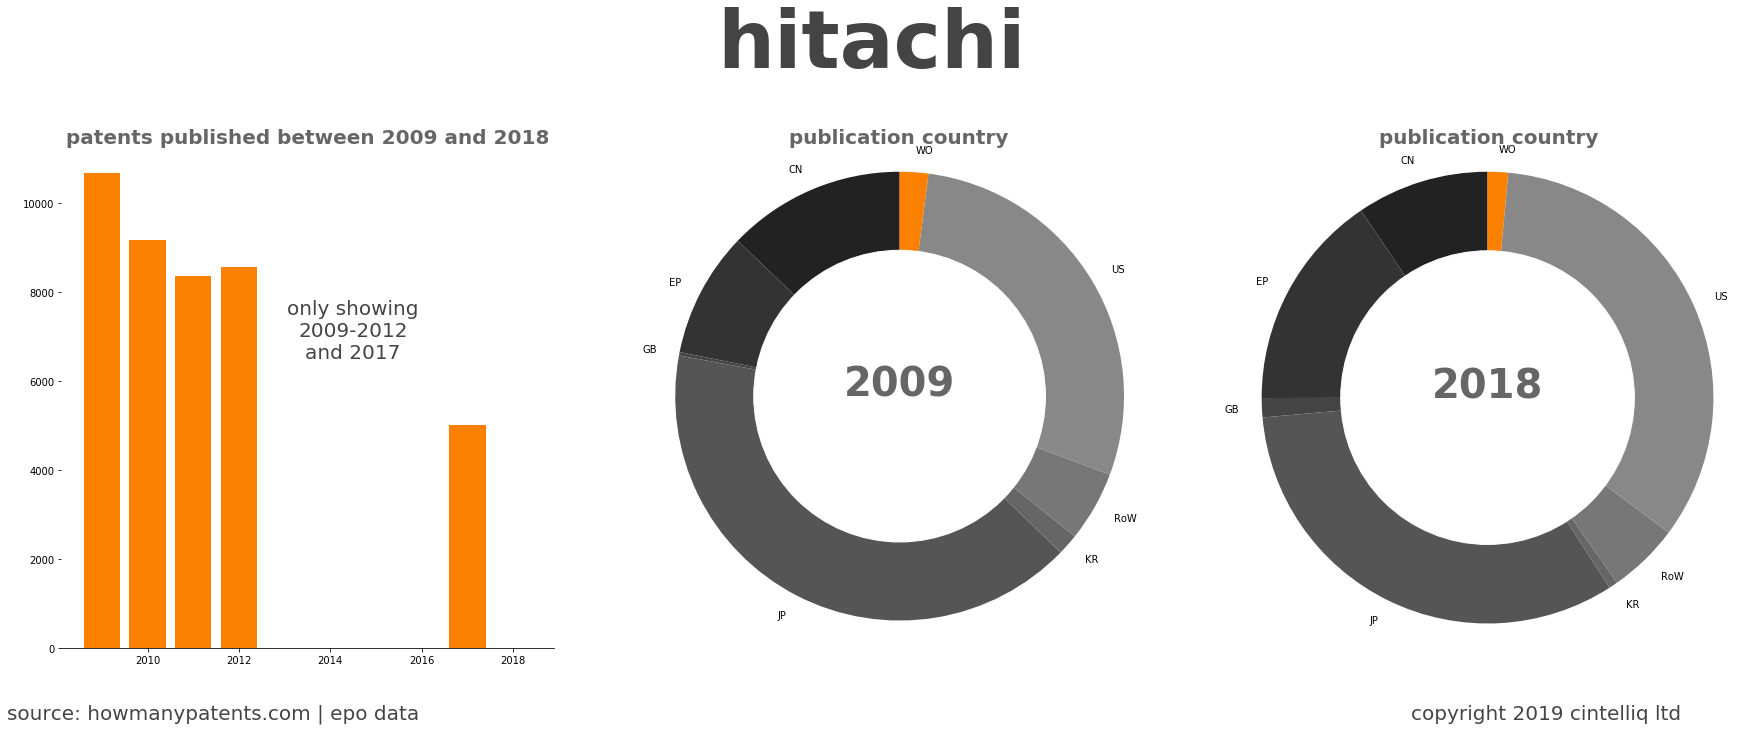 summary of patents for Hitachi